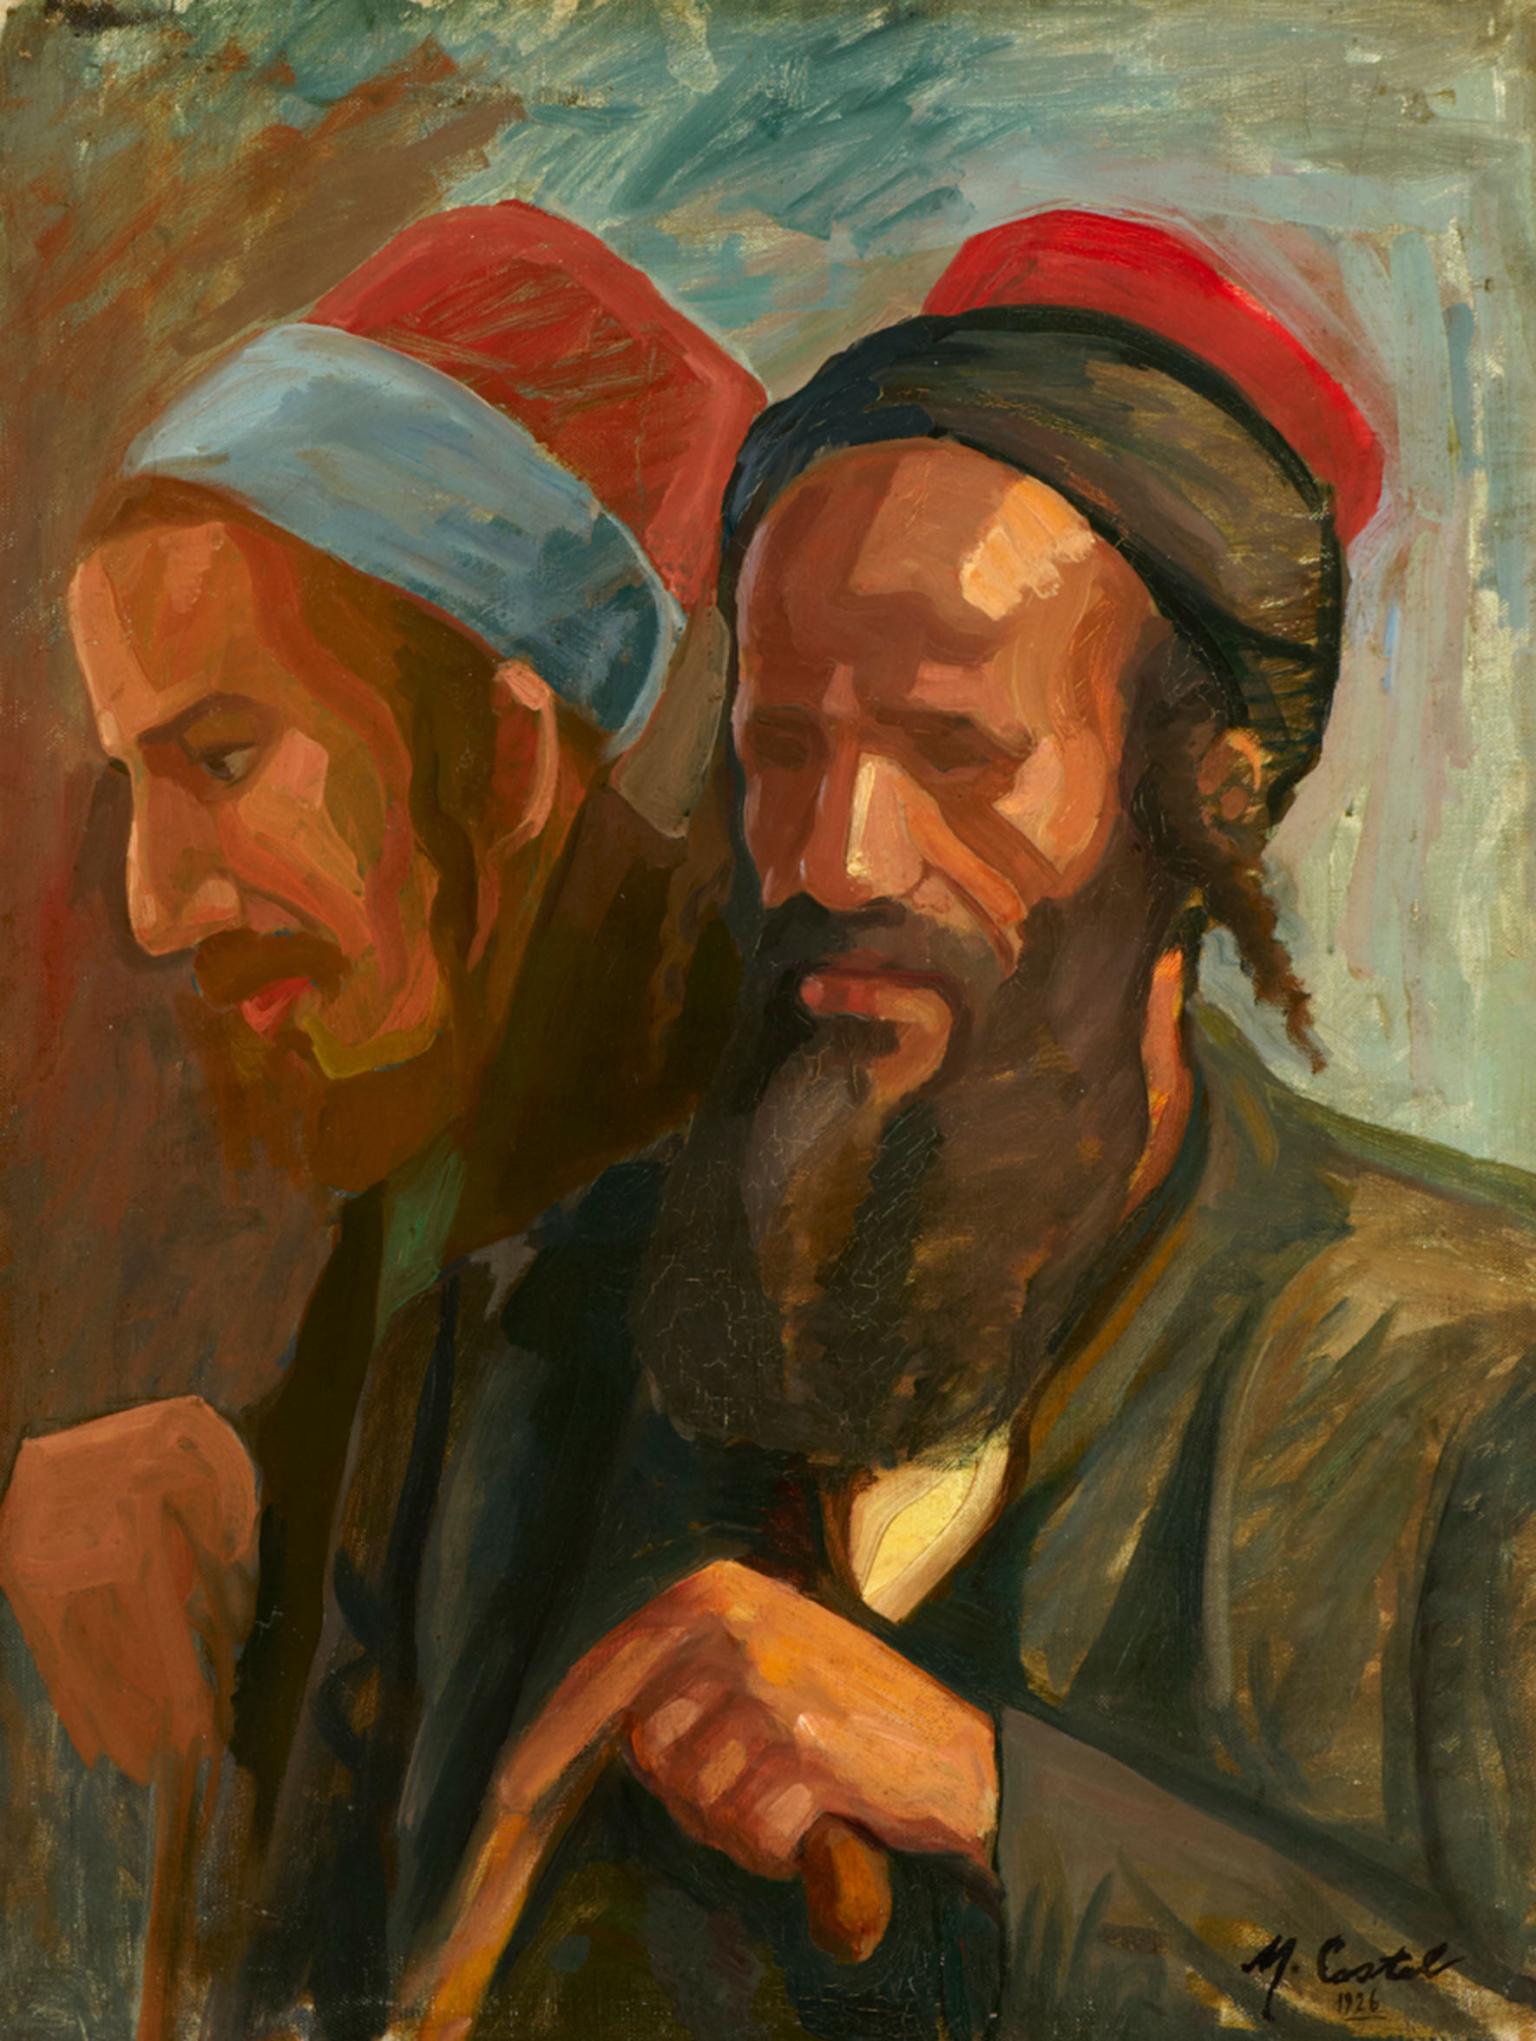 Painting of two bearded men in hats standing next to each other.